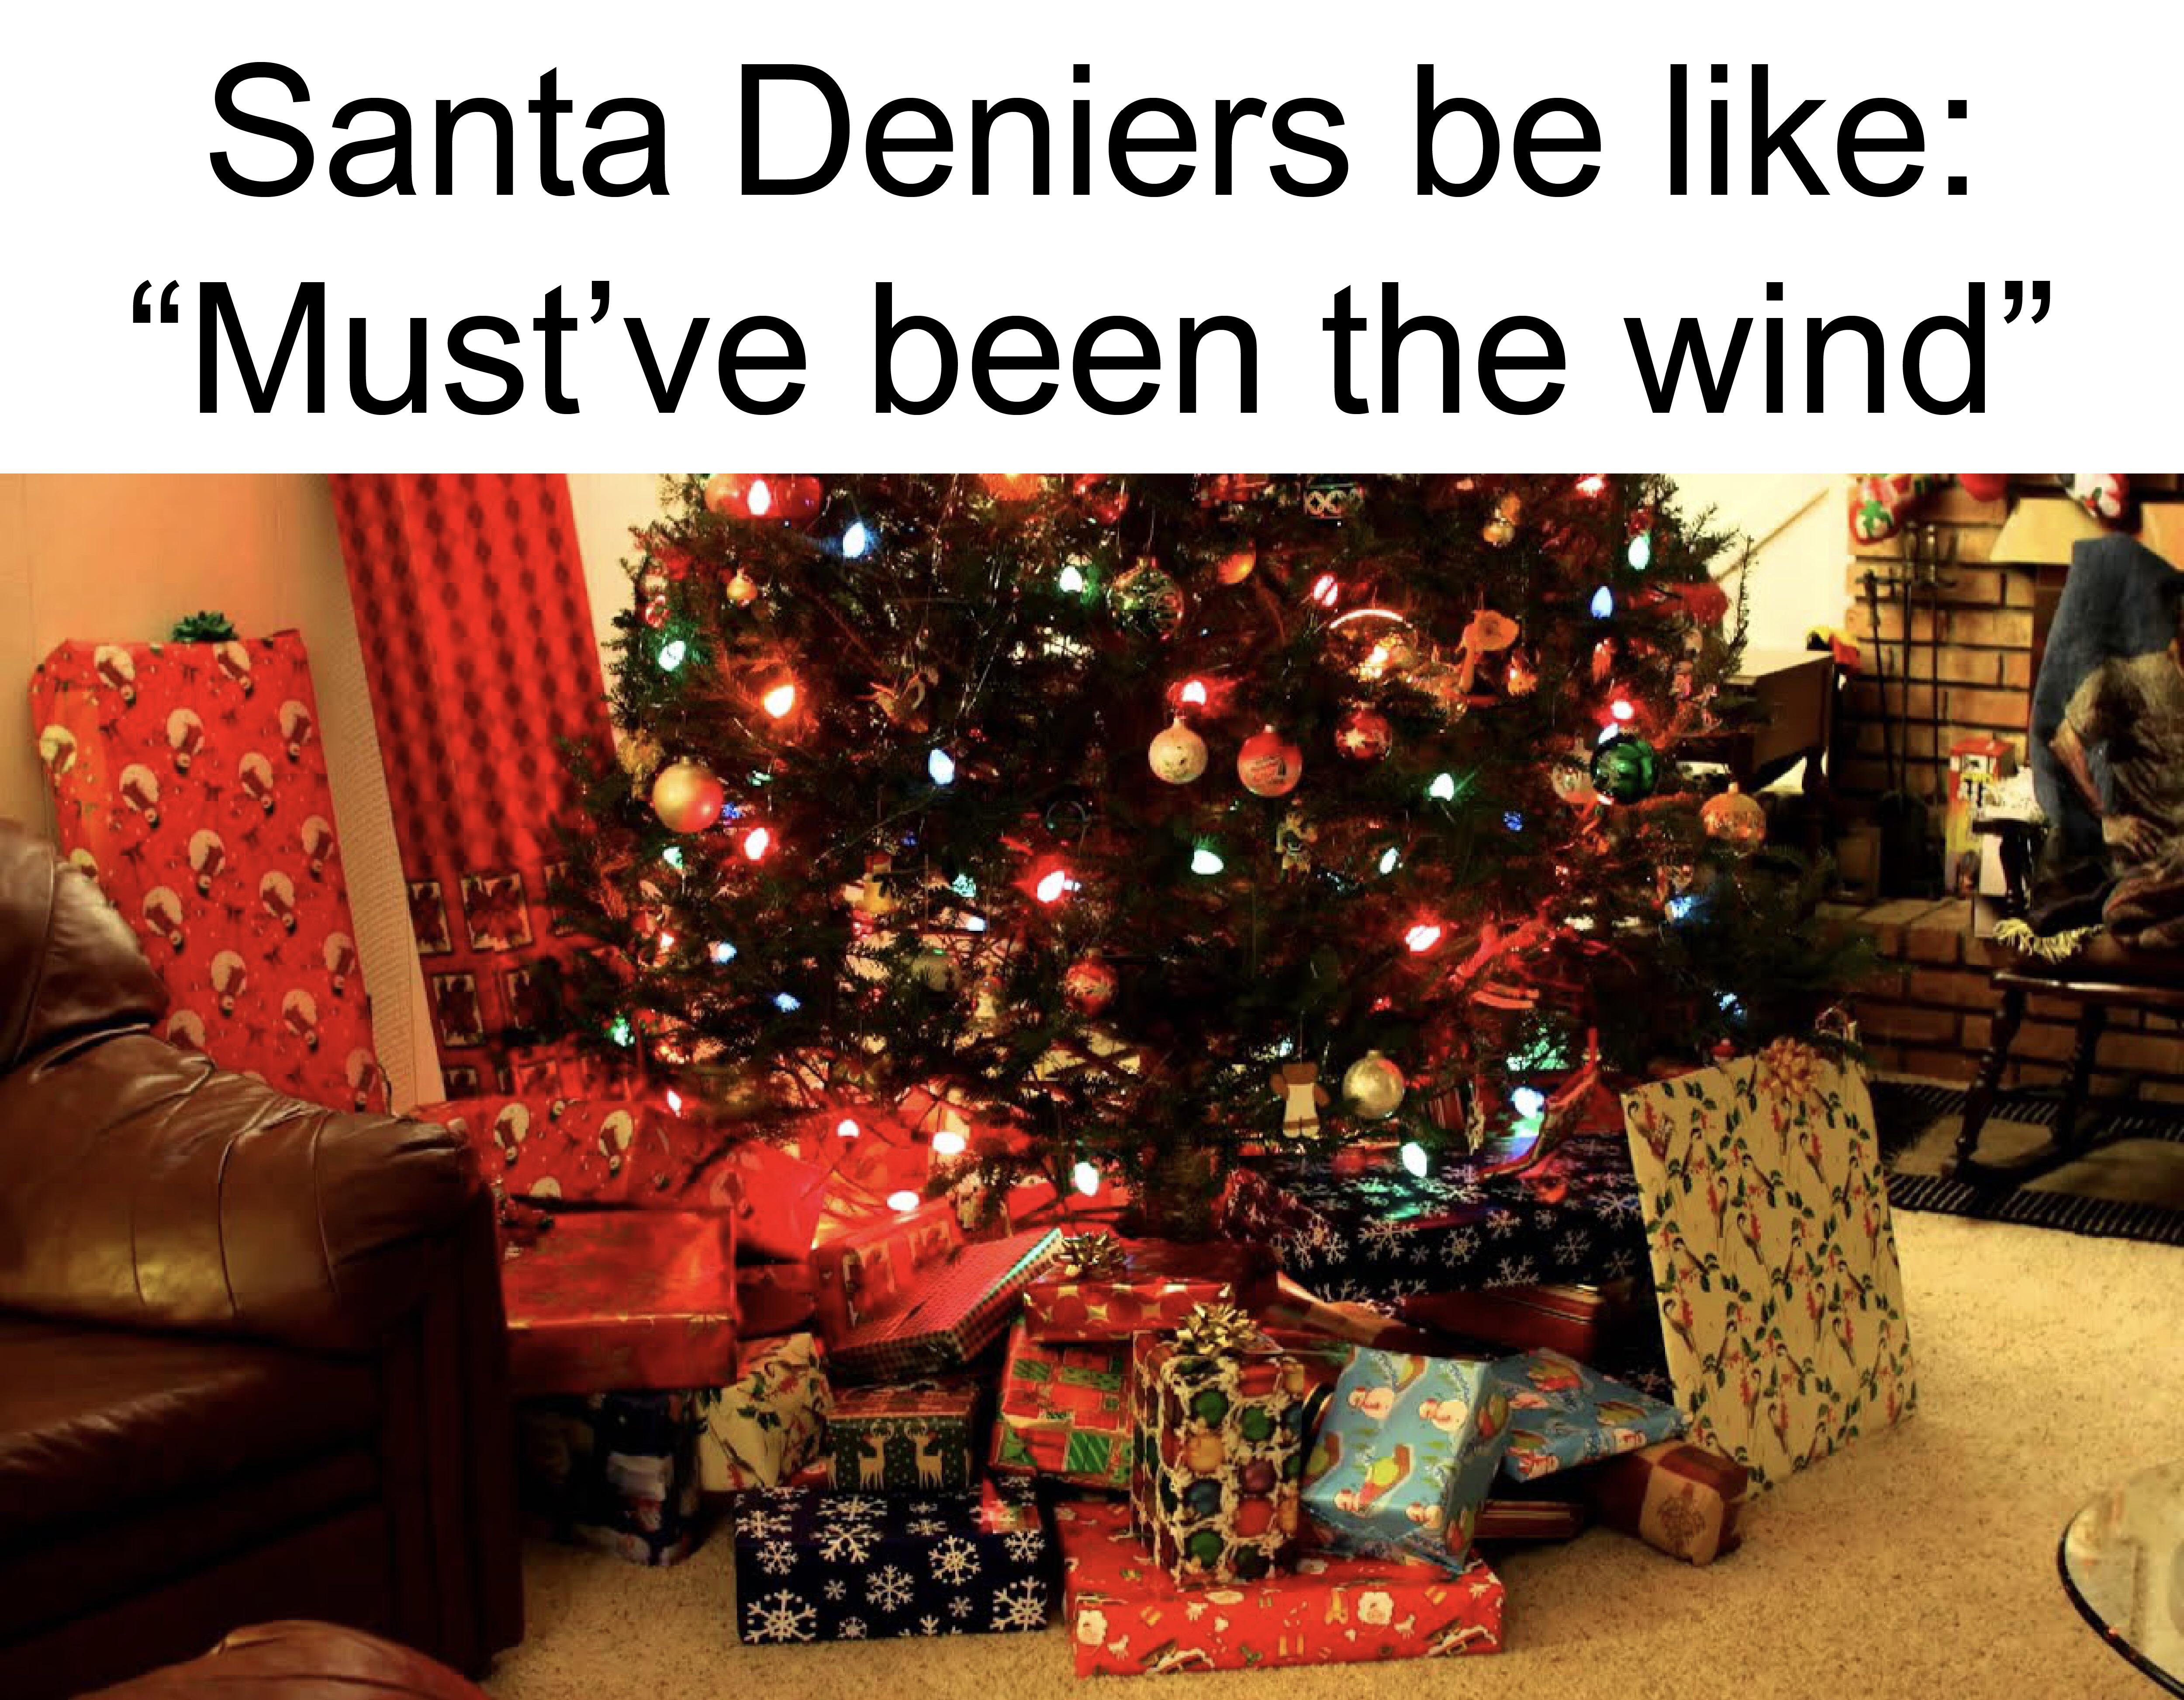 christmas presents england - Santa Deniers be "Must've been the wind"